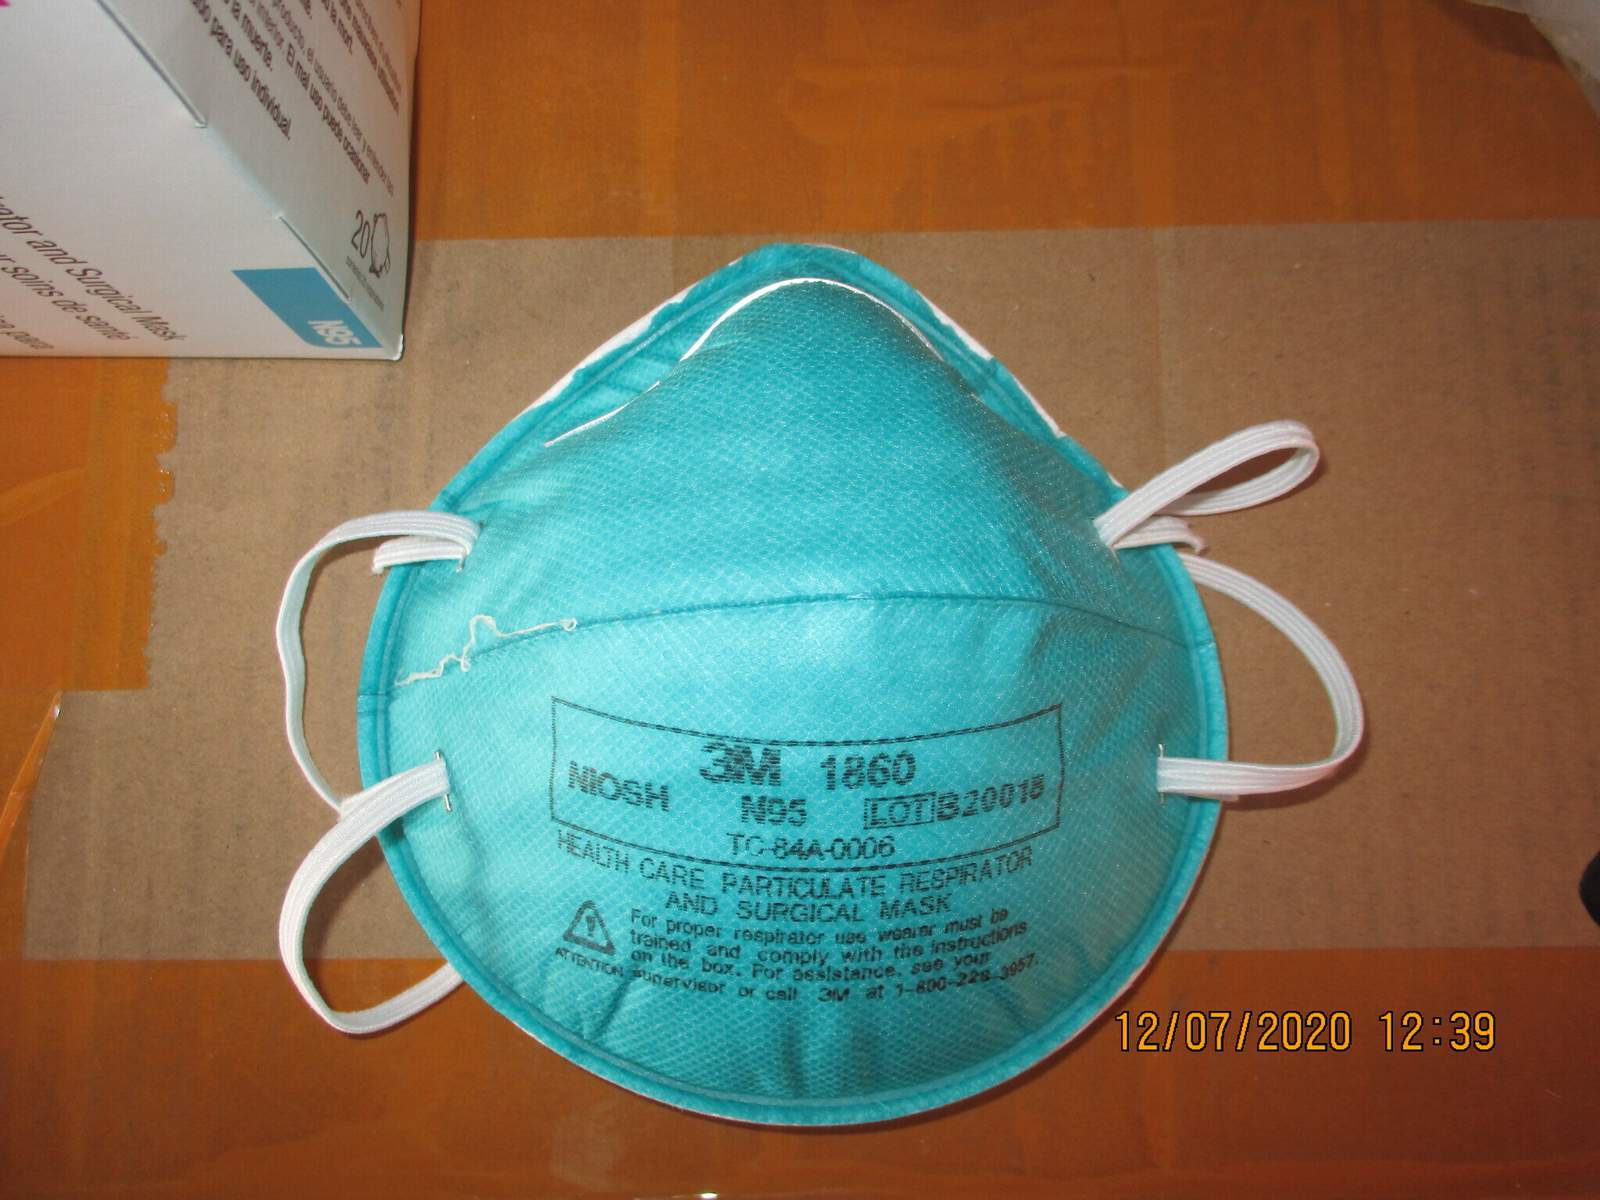 US govt seizes over 10M phony N95 masks in COVID-19 probe